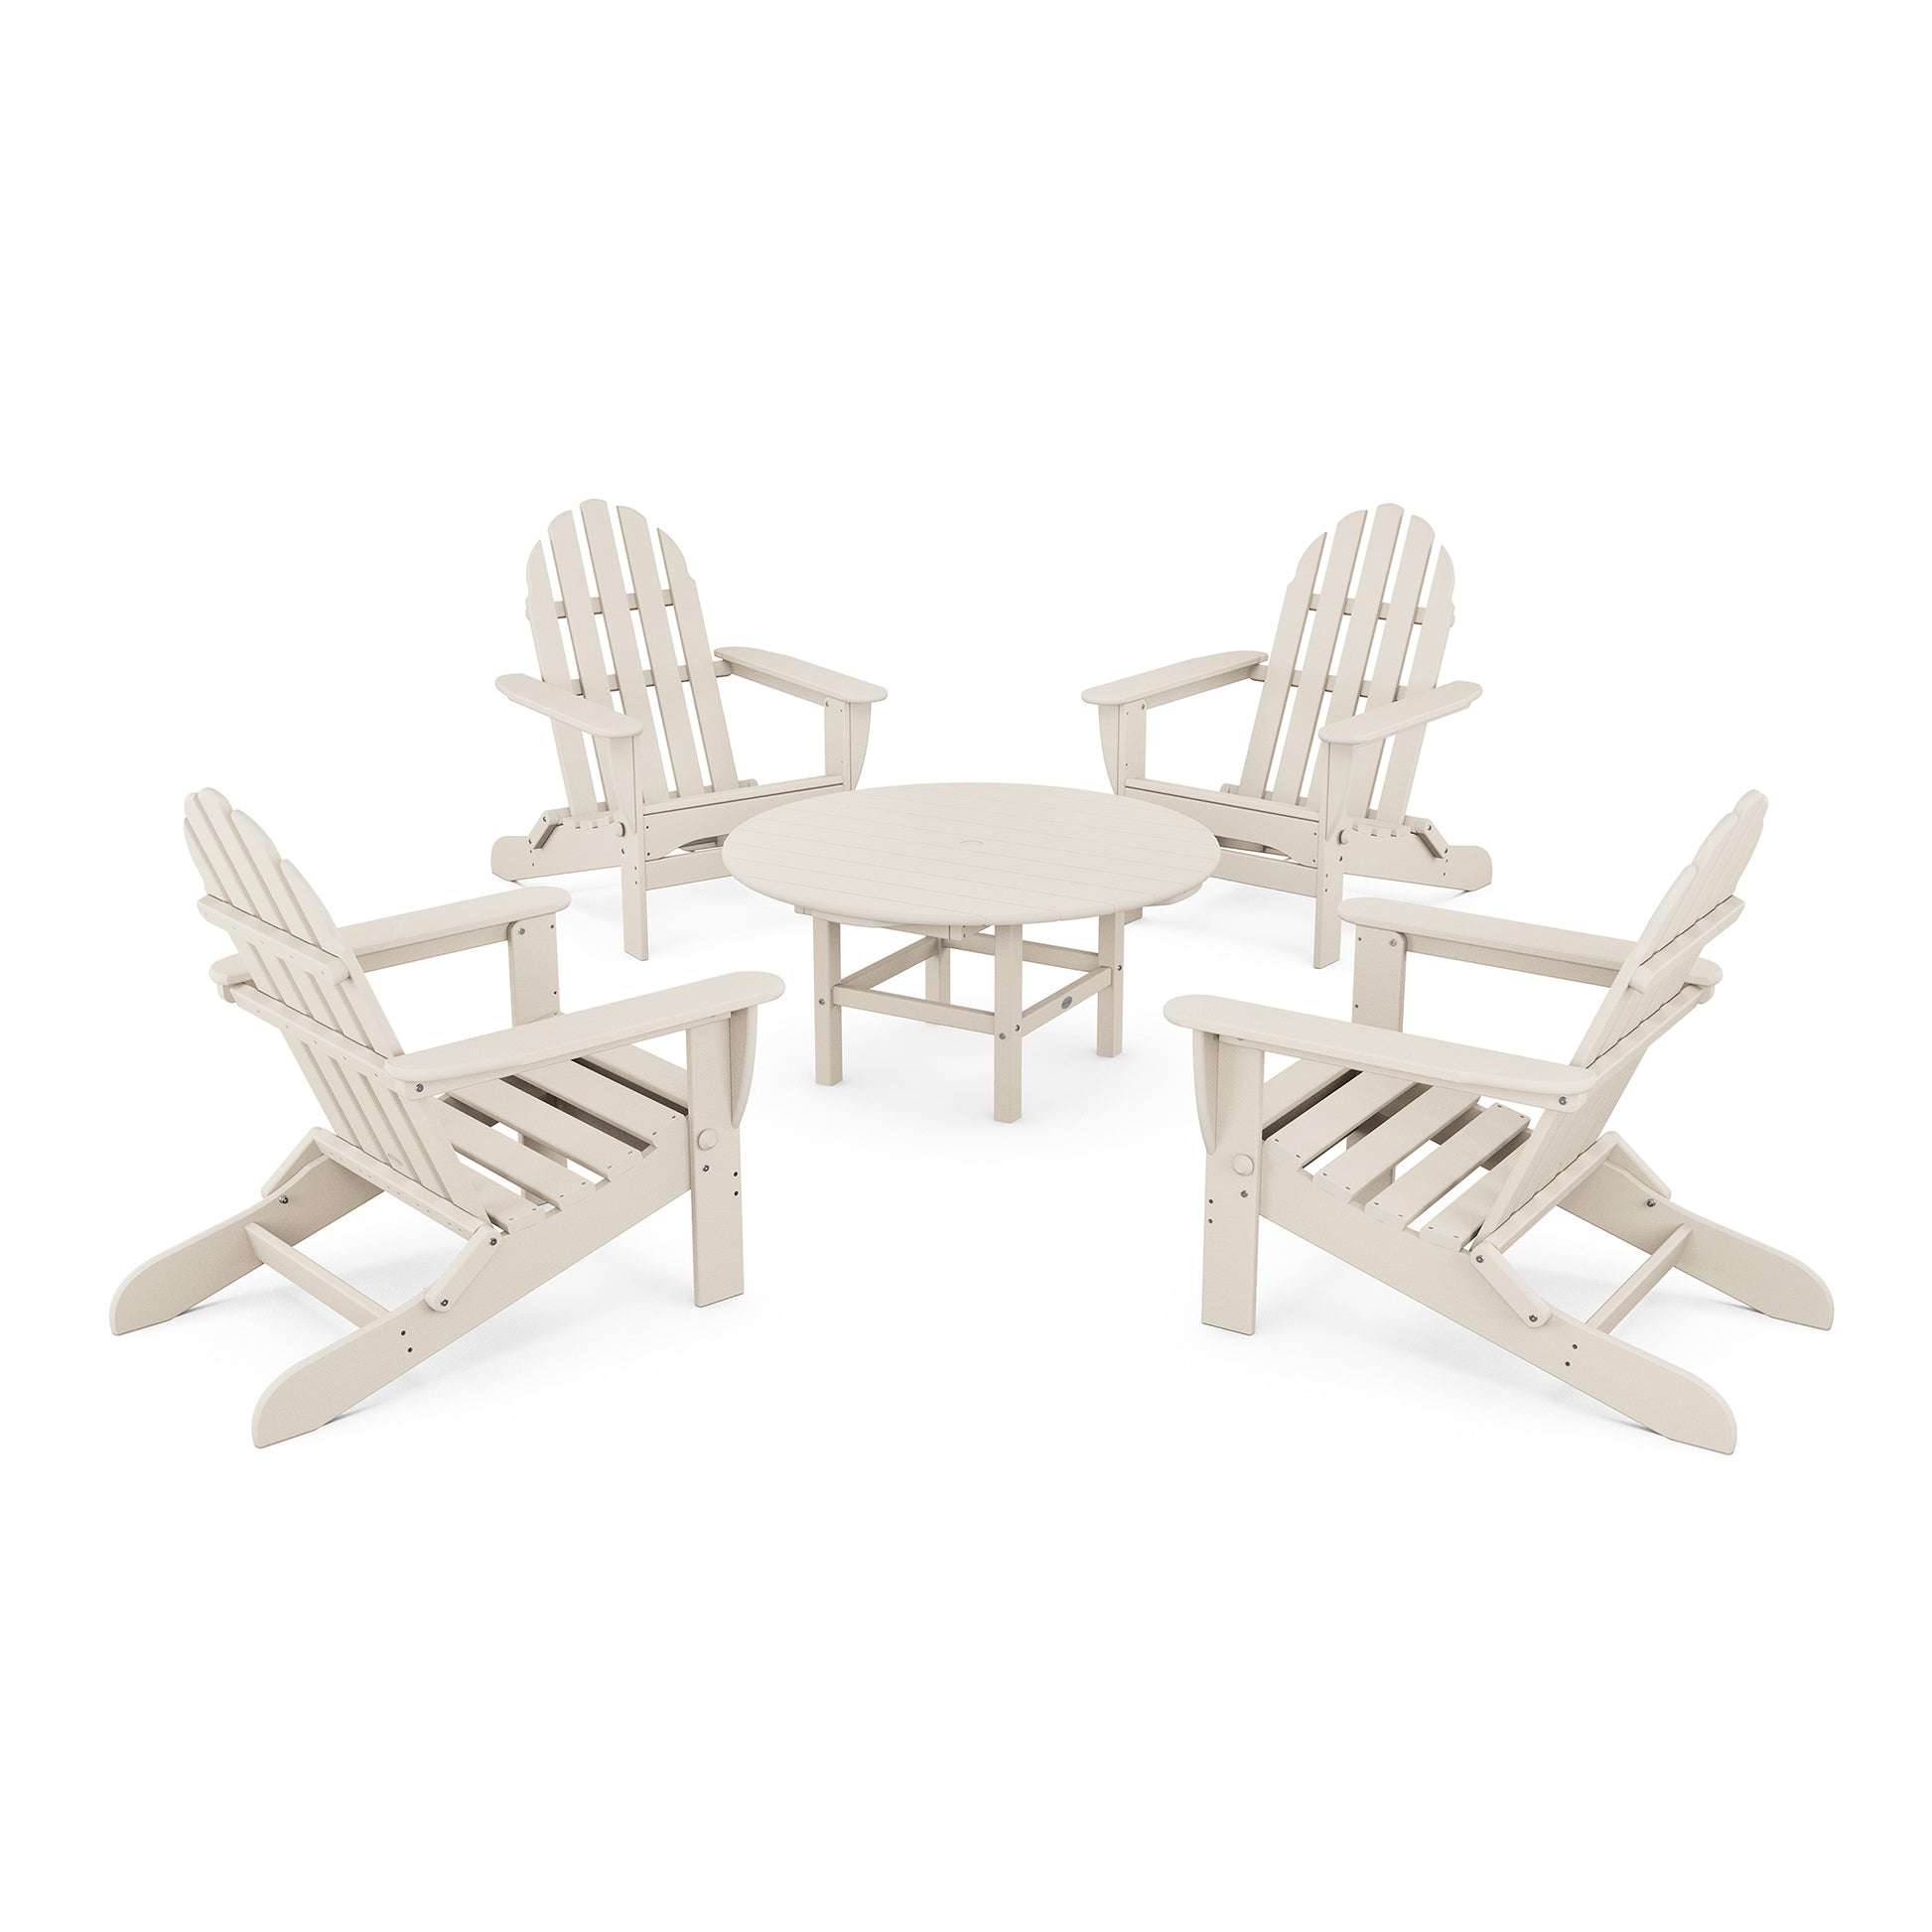 Four POLYWOOD Classic Folding Adirondack chairs arranged around a small, round table, all set on a plain white background. The furniture is made of recycled lumber, painted in a matt white finish.